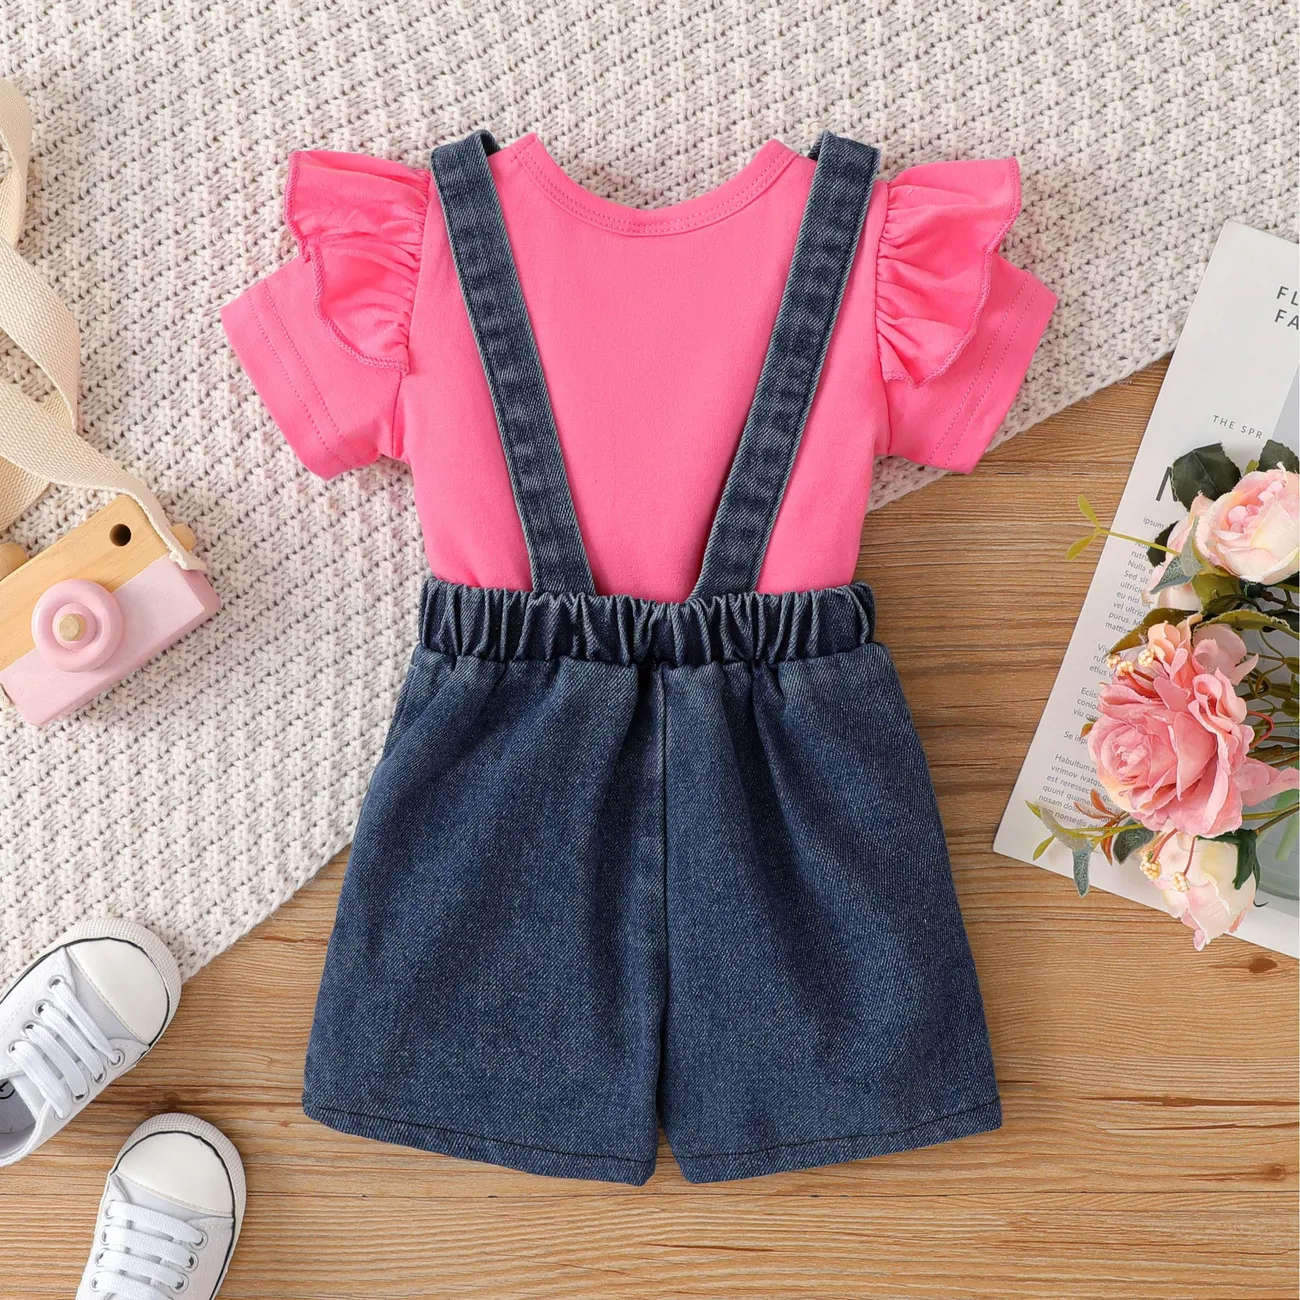 Cute 2pcs Cat Baby Girl Sets with Hole Design and Animal Pattern DENIMBLUE big image 1